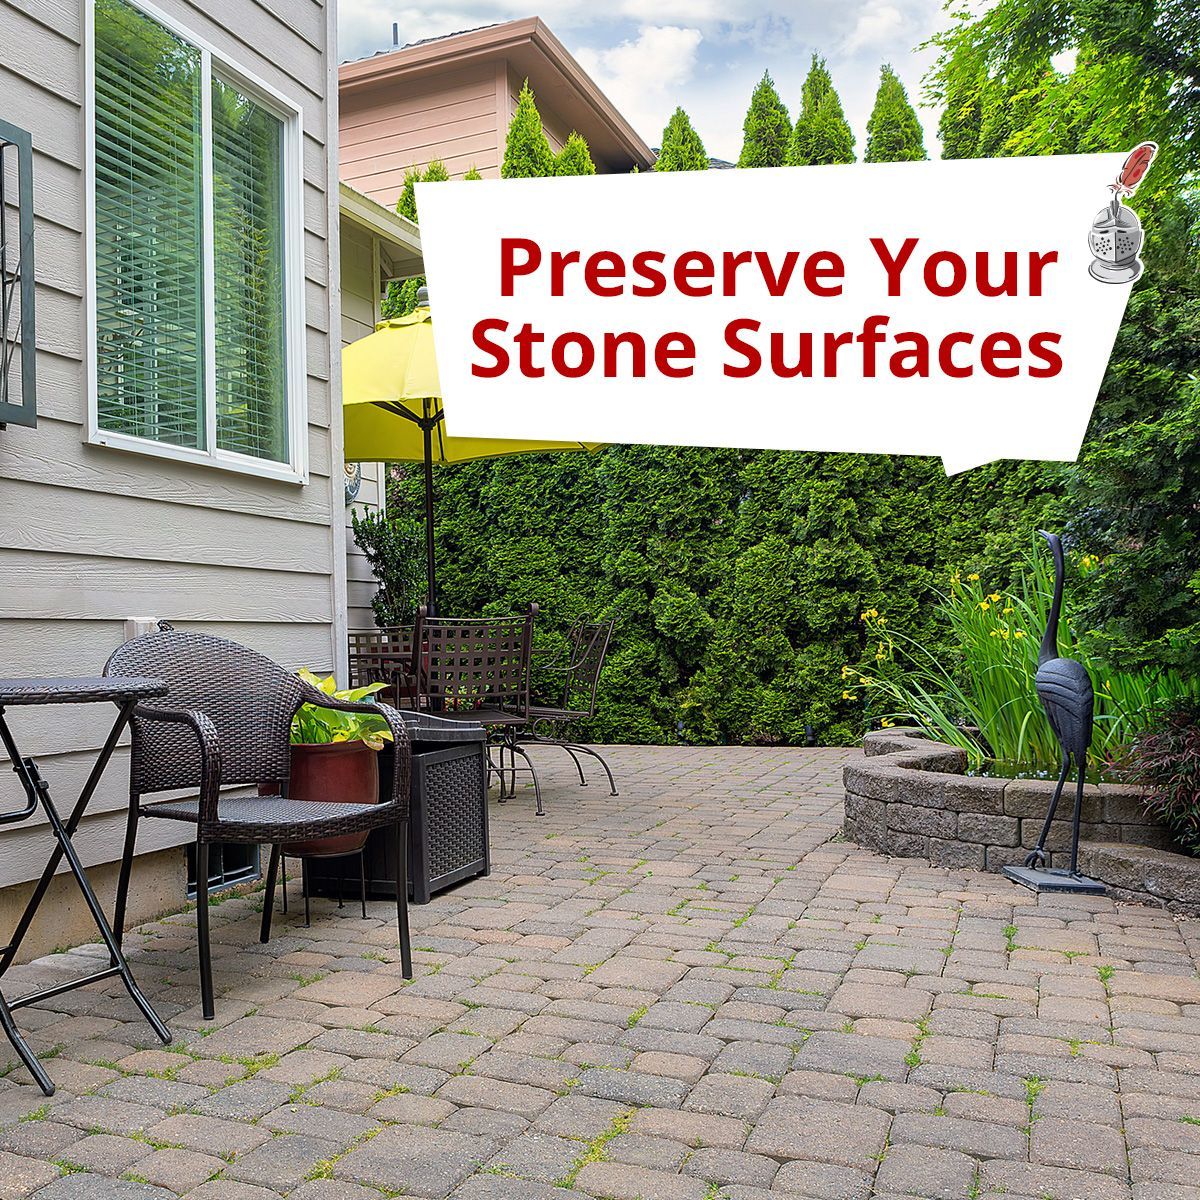 Preserve Your Stone Surfaces